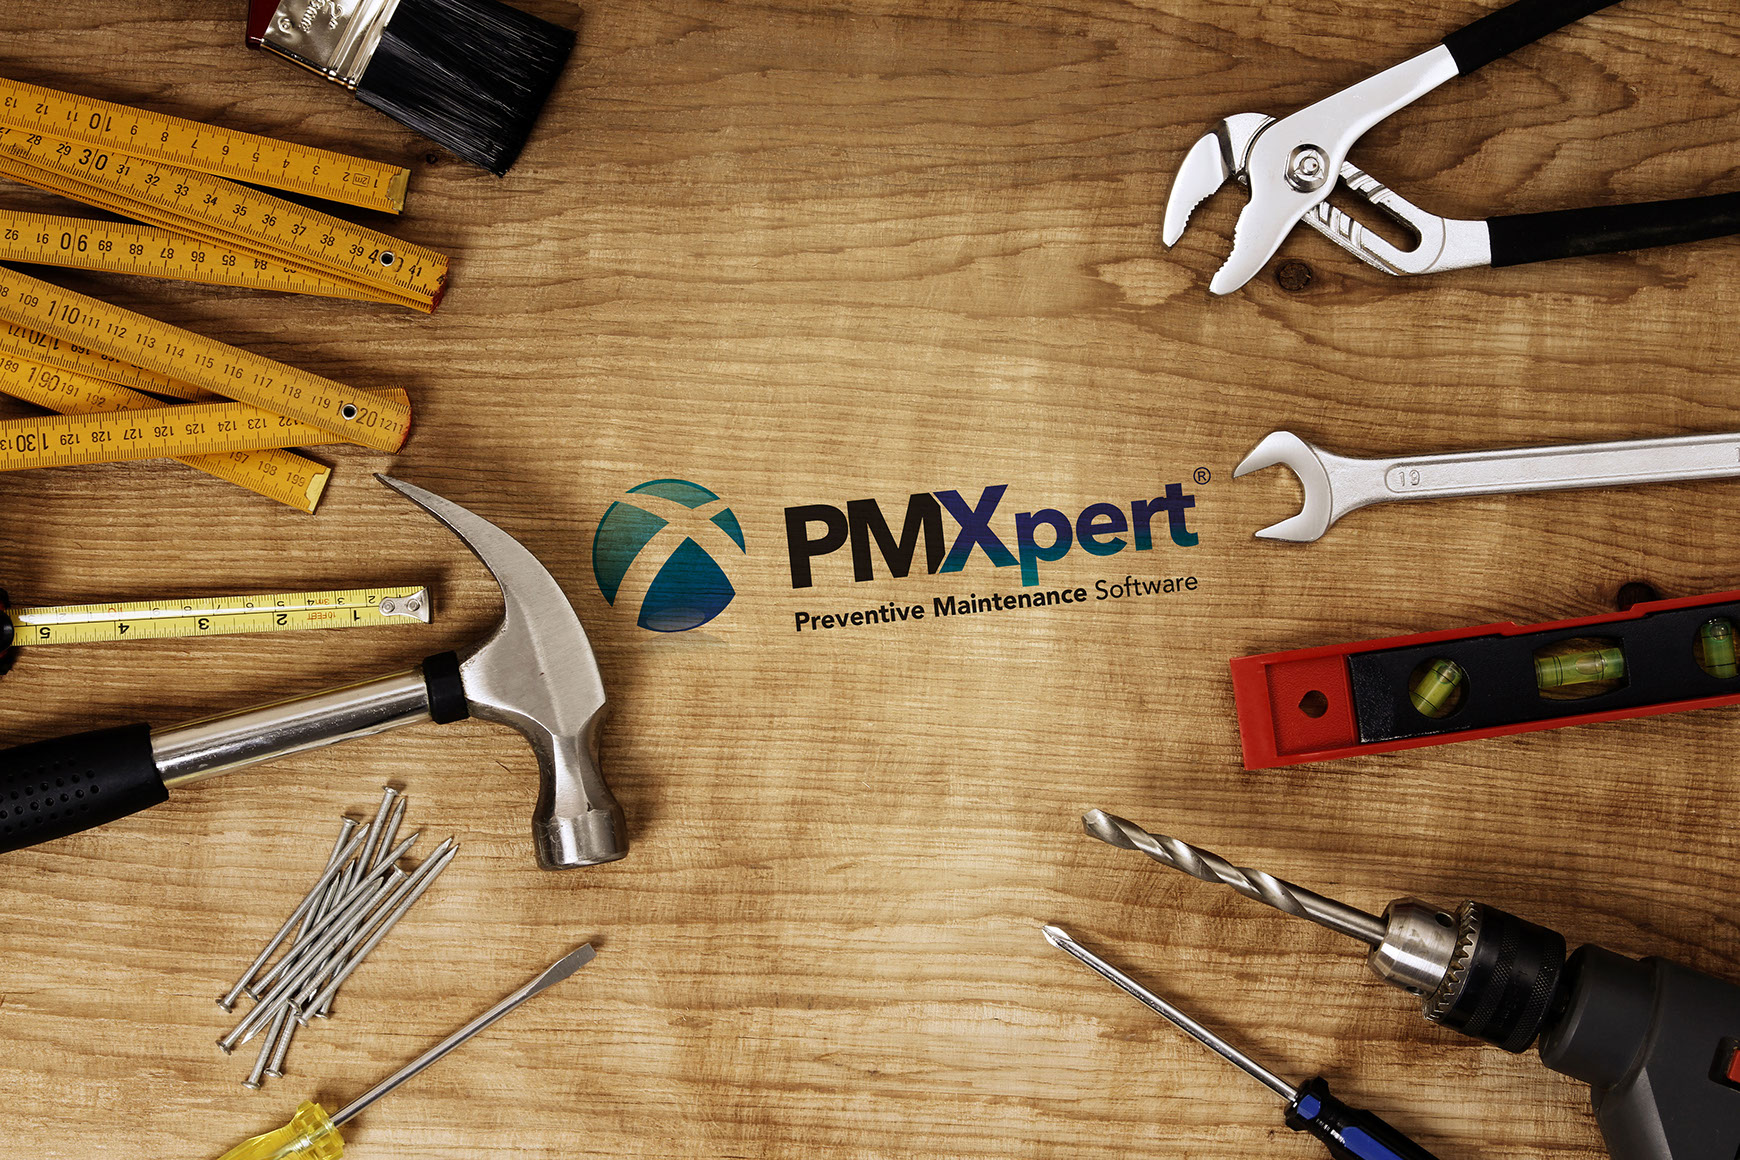 Tools with PMXpert logo